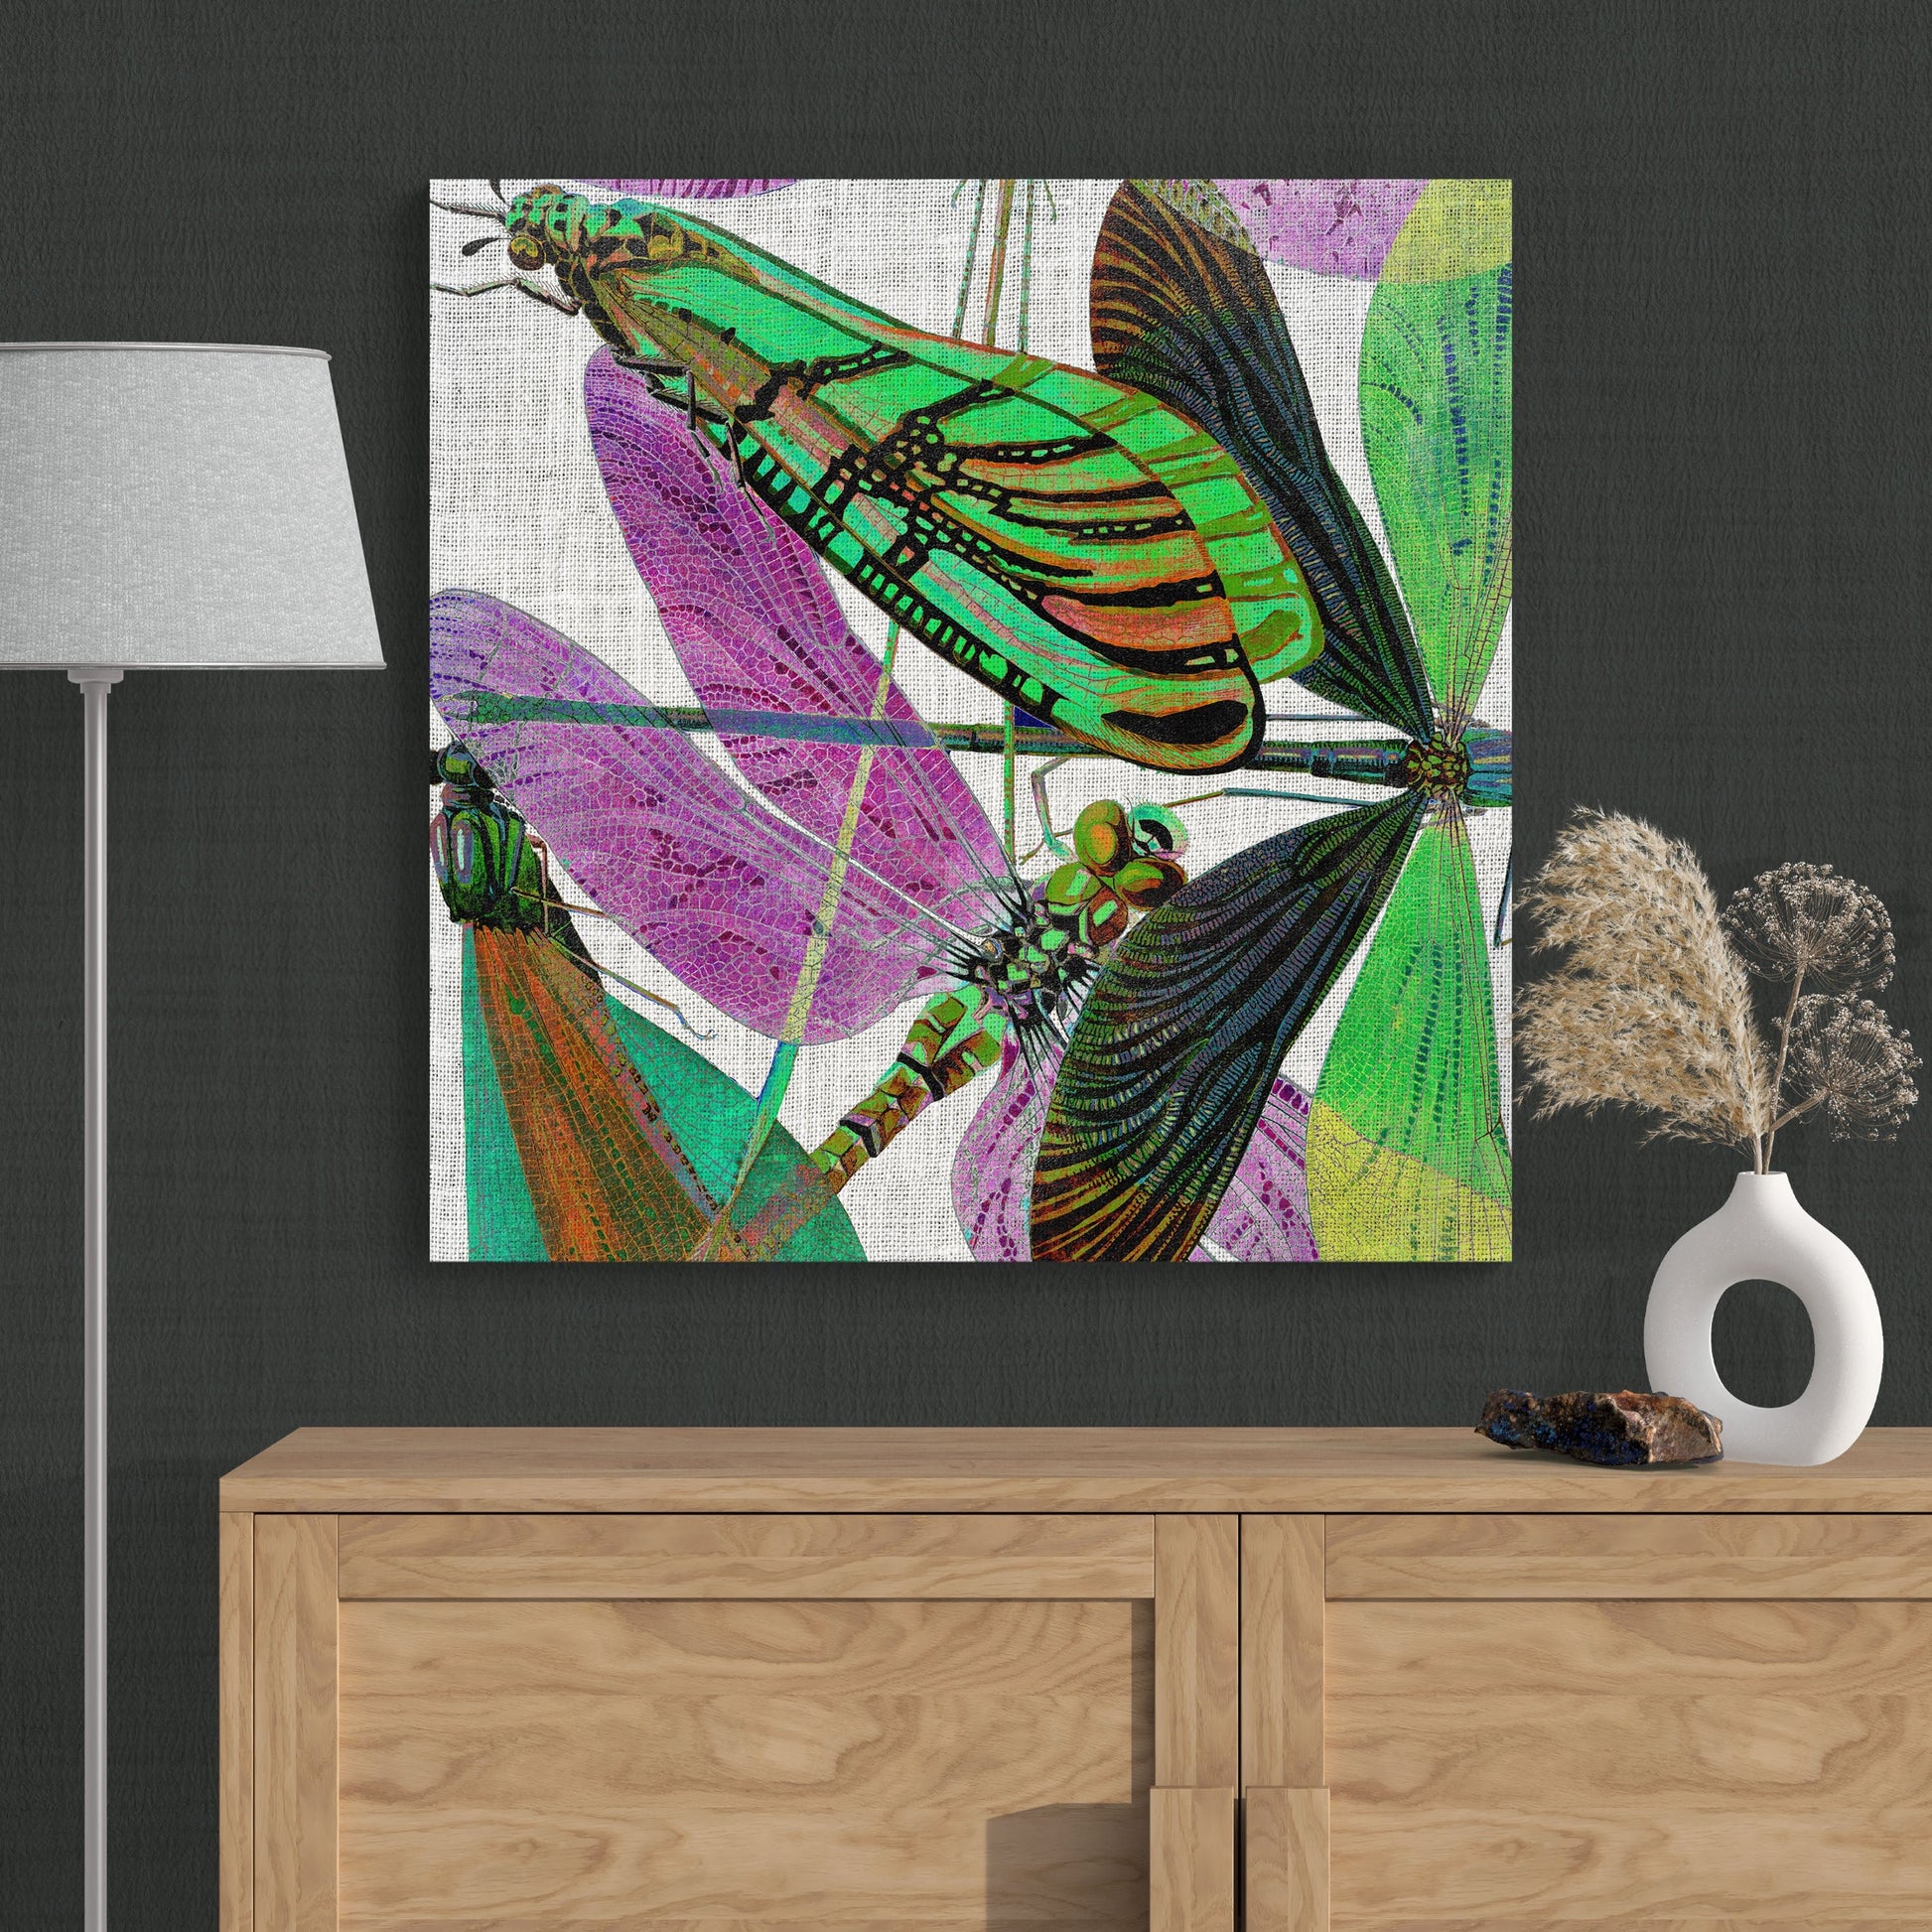 Abstract Insects Damselfly Collage 1 - Colorful Nature Canvas Wall Art - Retro Reverence